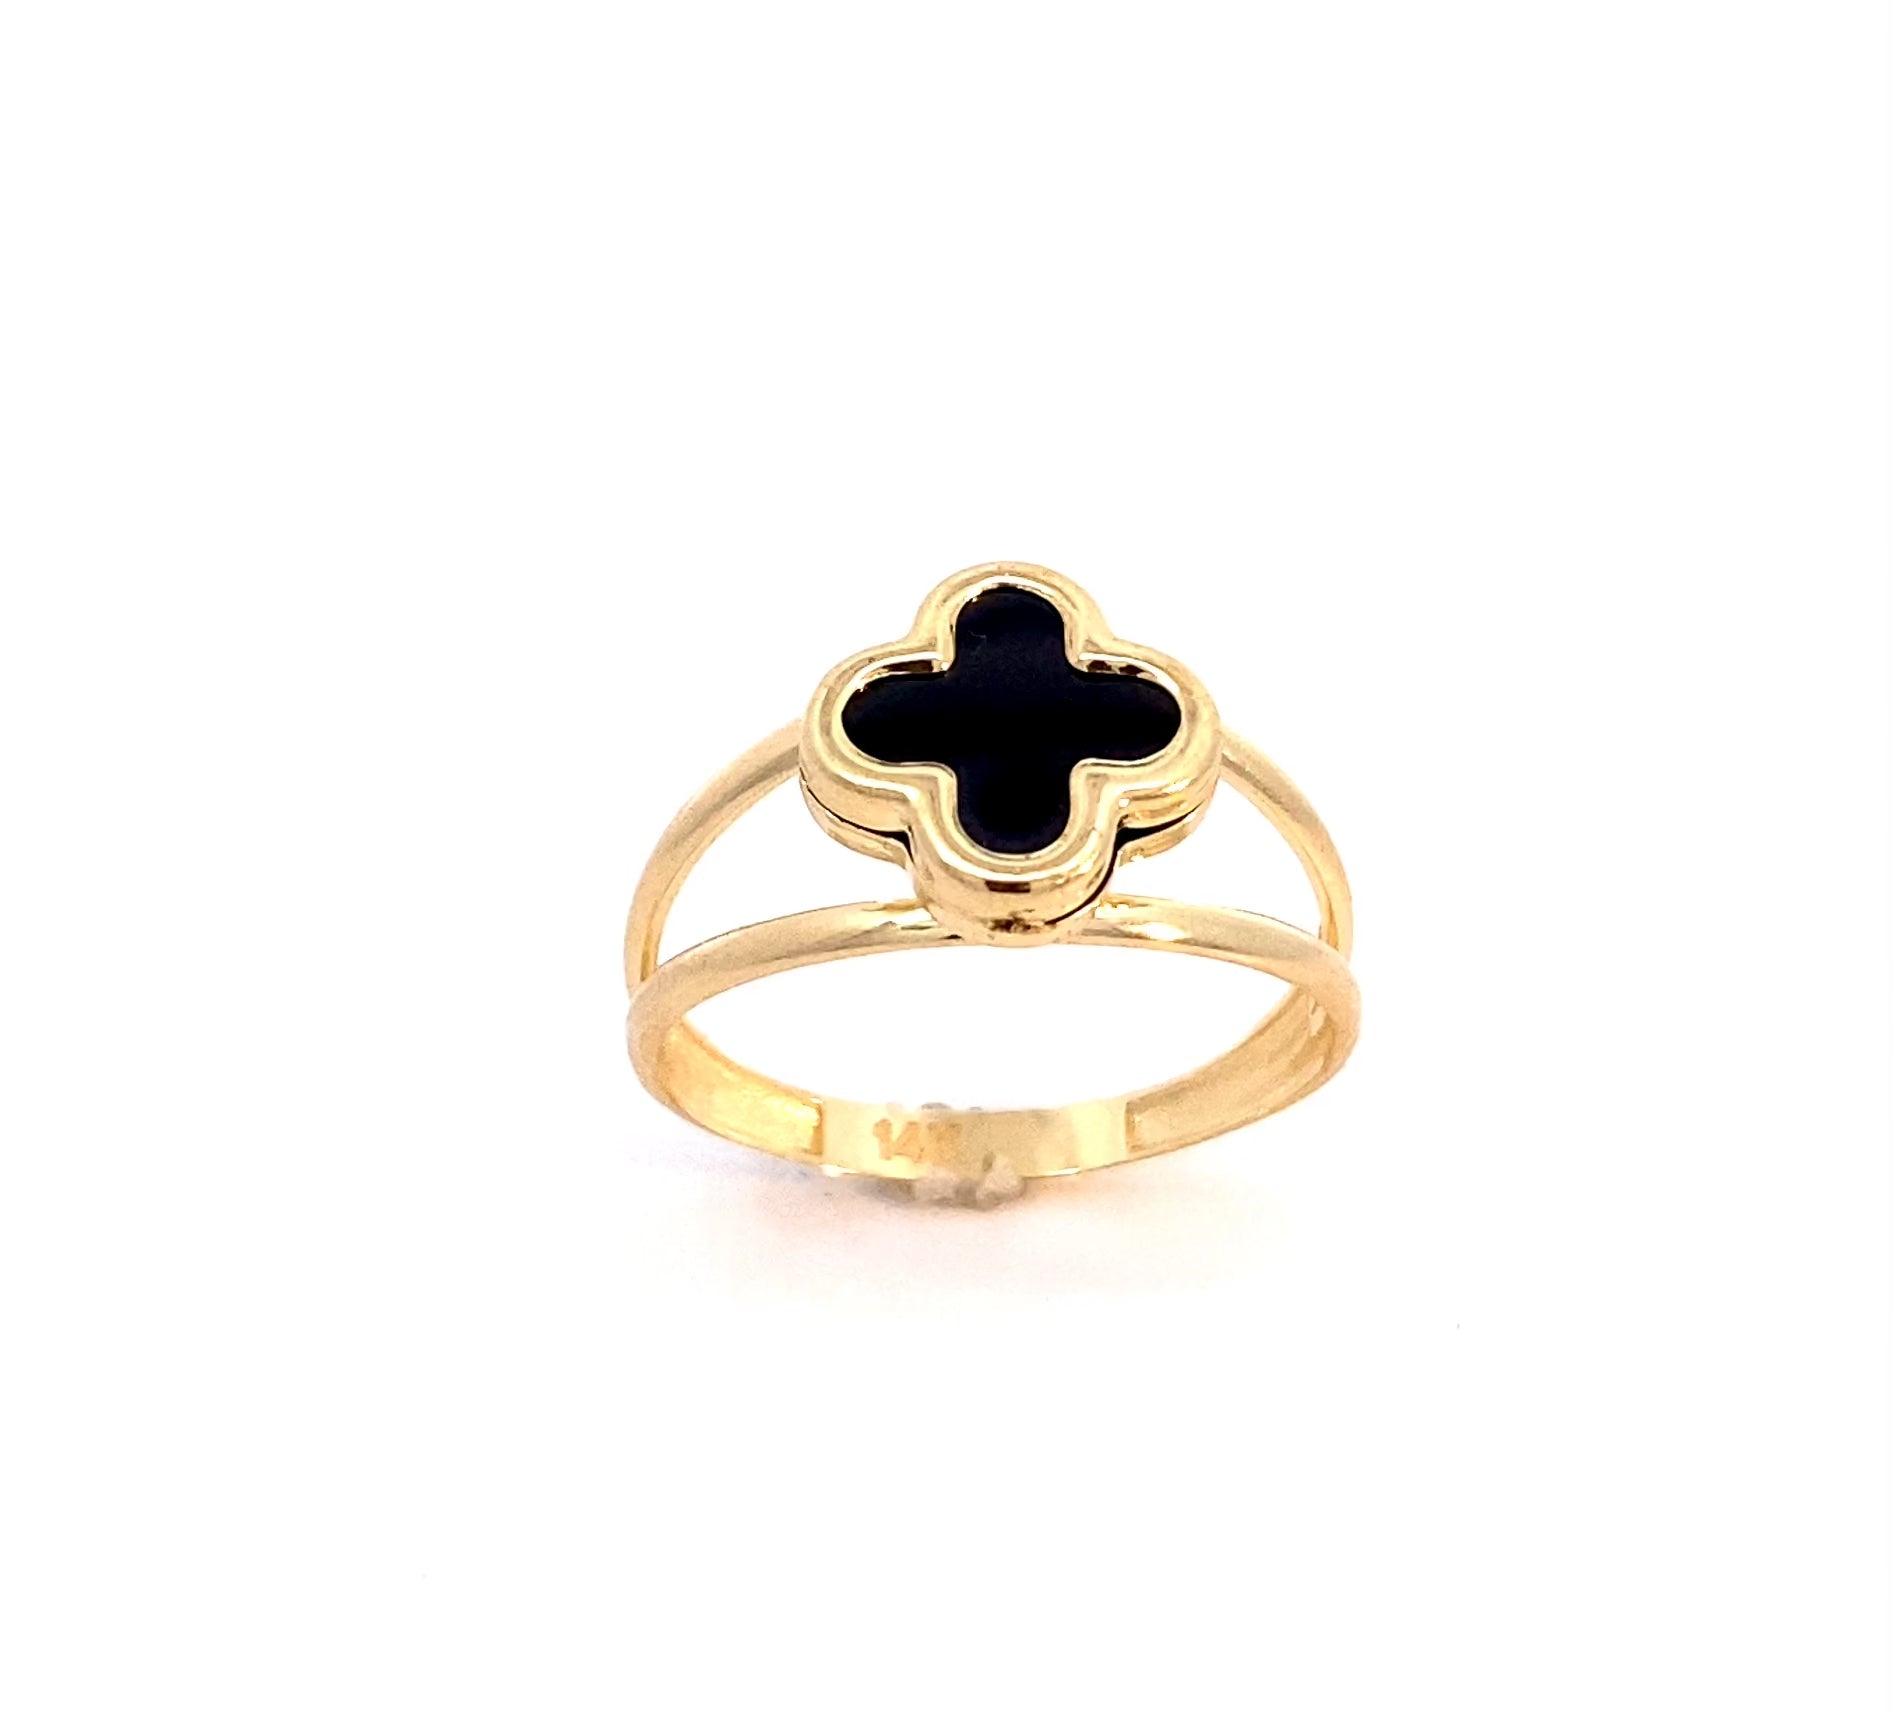 14K Solid Yellow Gold Clover Ring, trendy gold ring, solid yellow gold ring, white clover ring, black clover ring, trendy gold ring, gift, mother’s day gift., valentine’s day gift, birthday gift, anniversary gift.